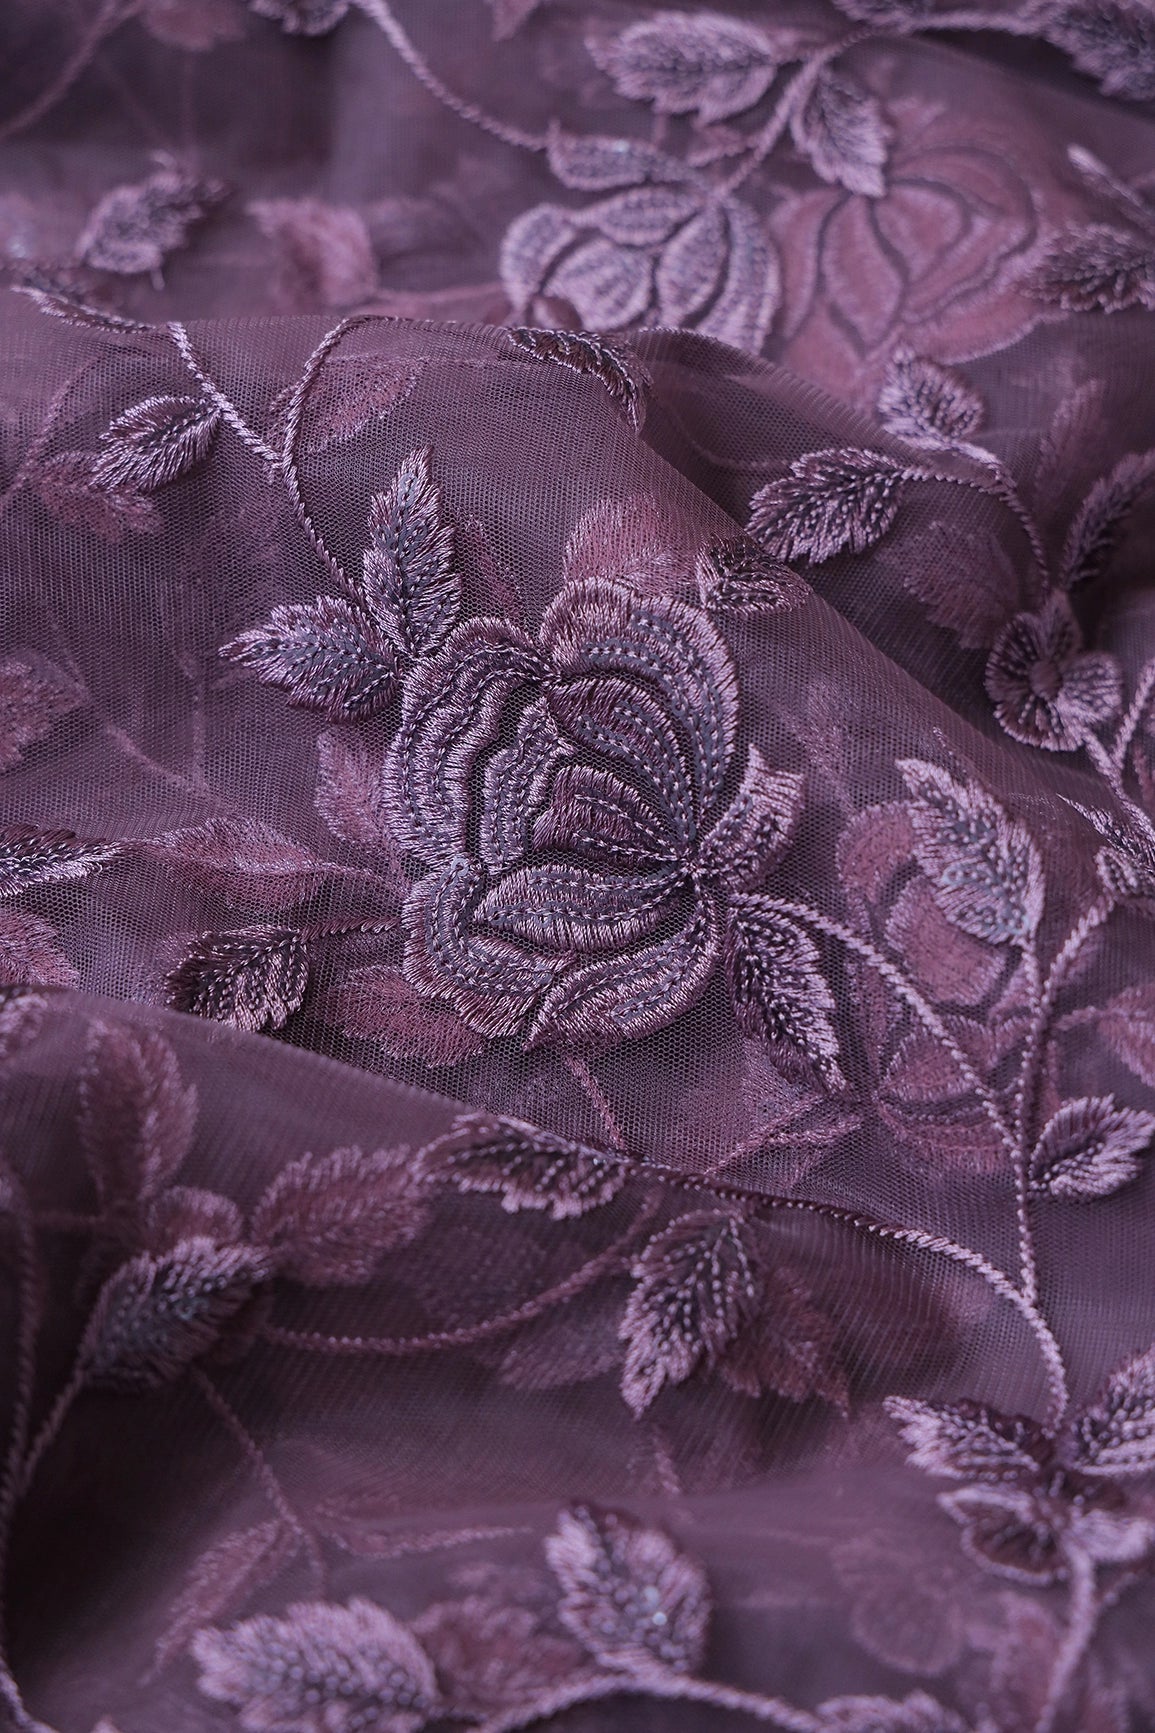 3 Meter Cut Piece Of Purple Thread With Sequins Floral Embroidery On Viola Purple Soft Net Fabric - doeraa